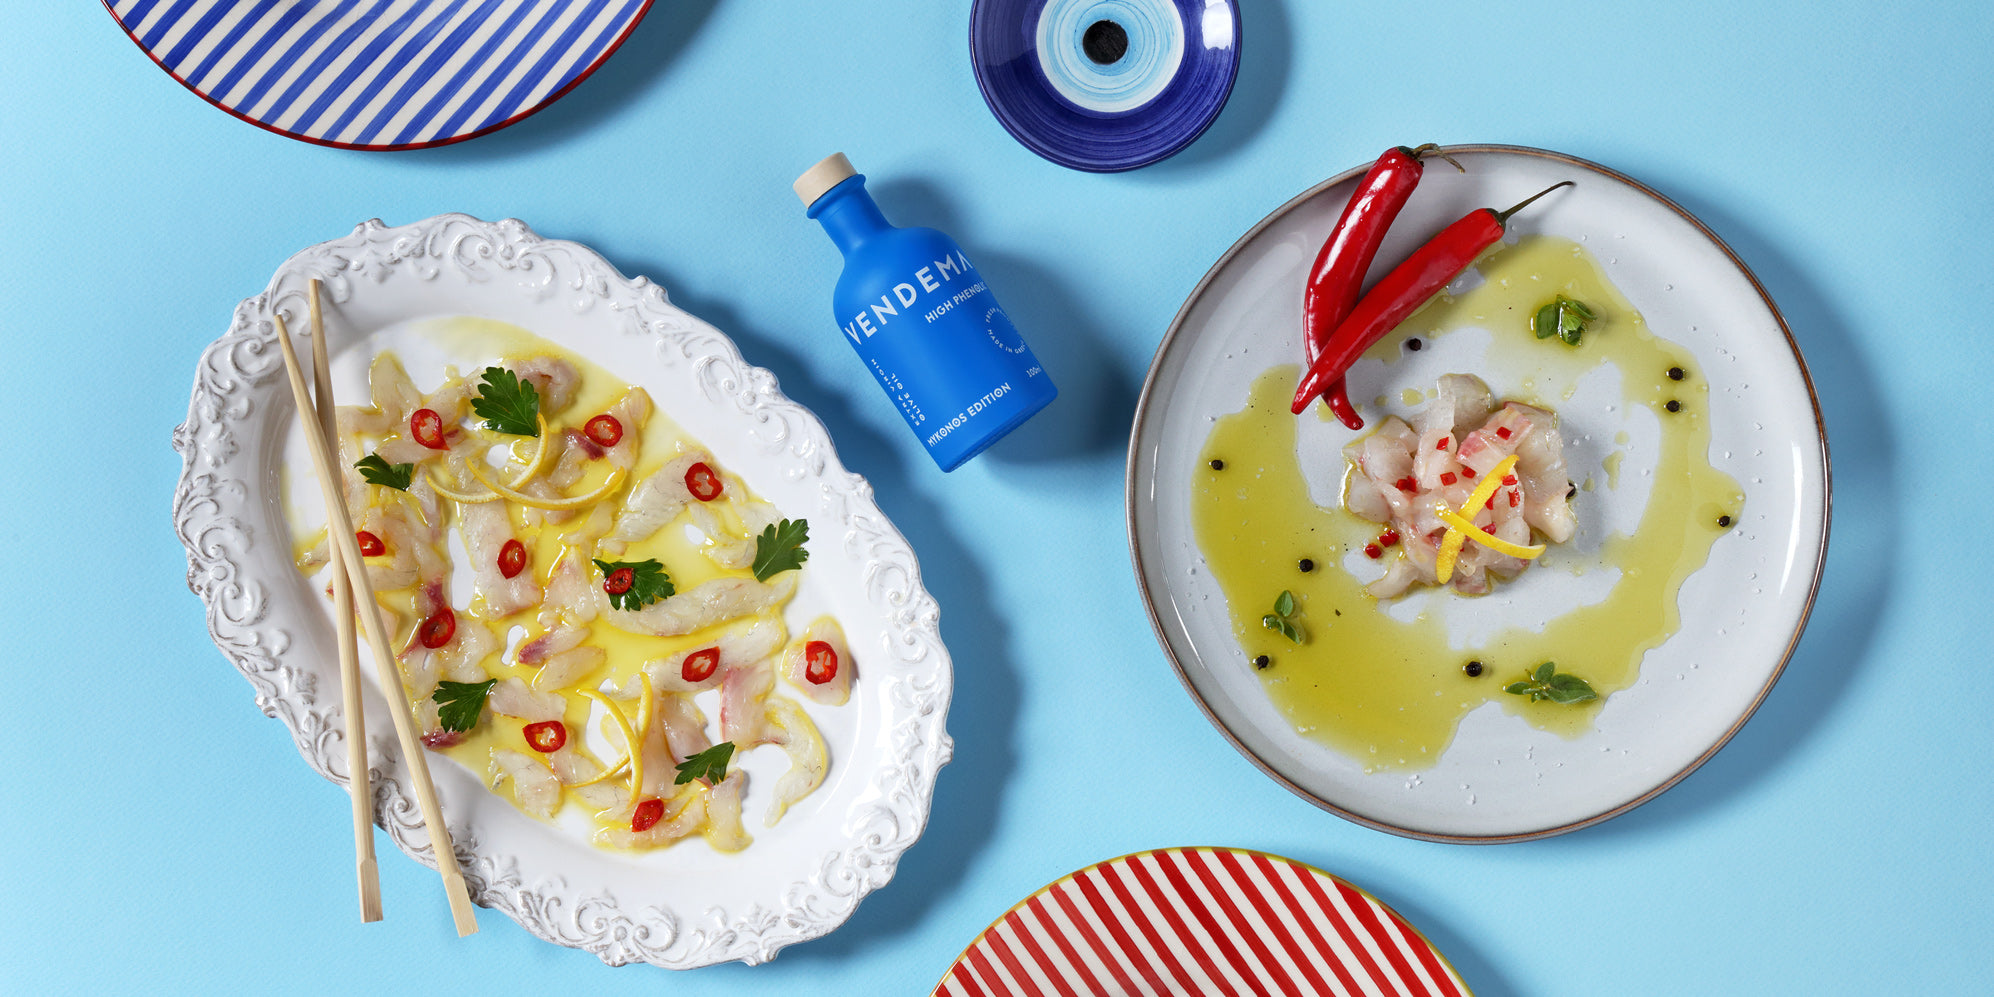 Vendema High Phenolic Extra Virgin Olive Oil Bottle served with Fish Carpaccio.